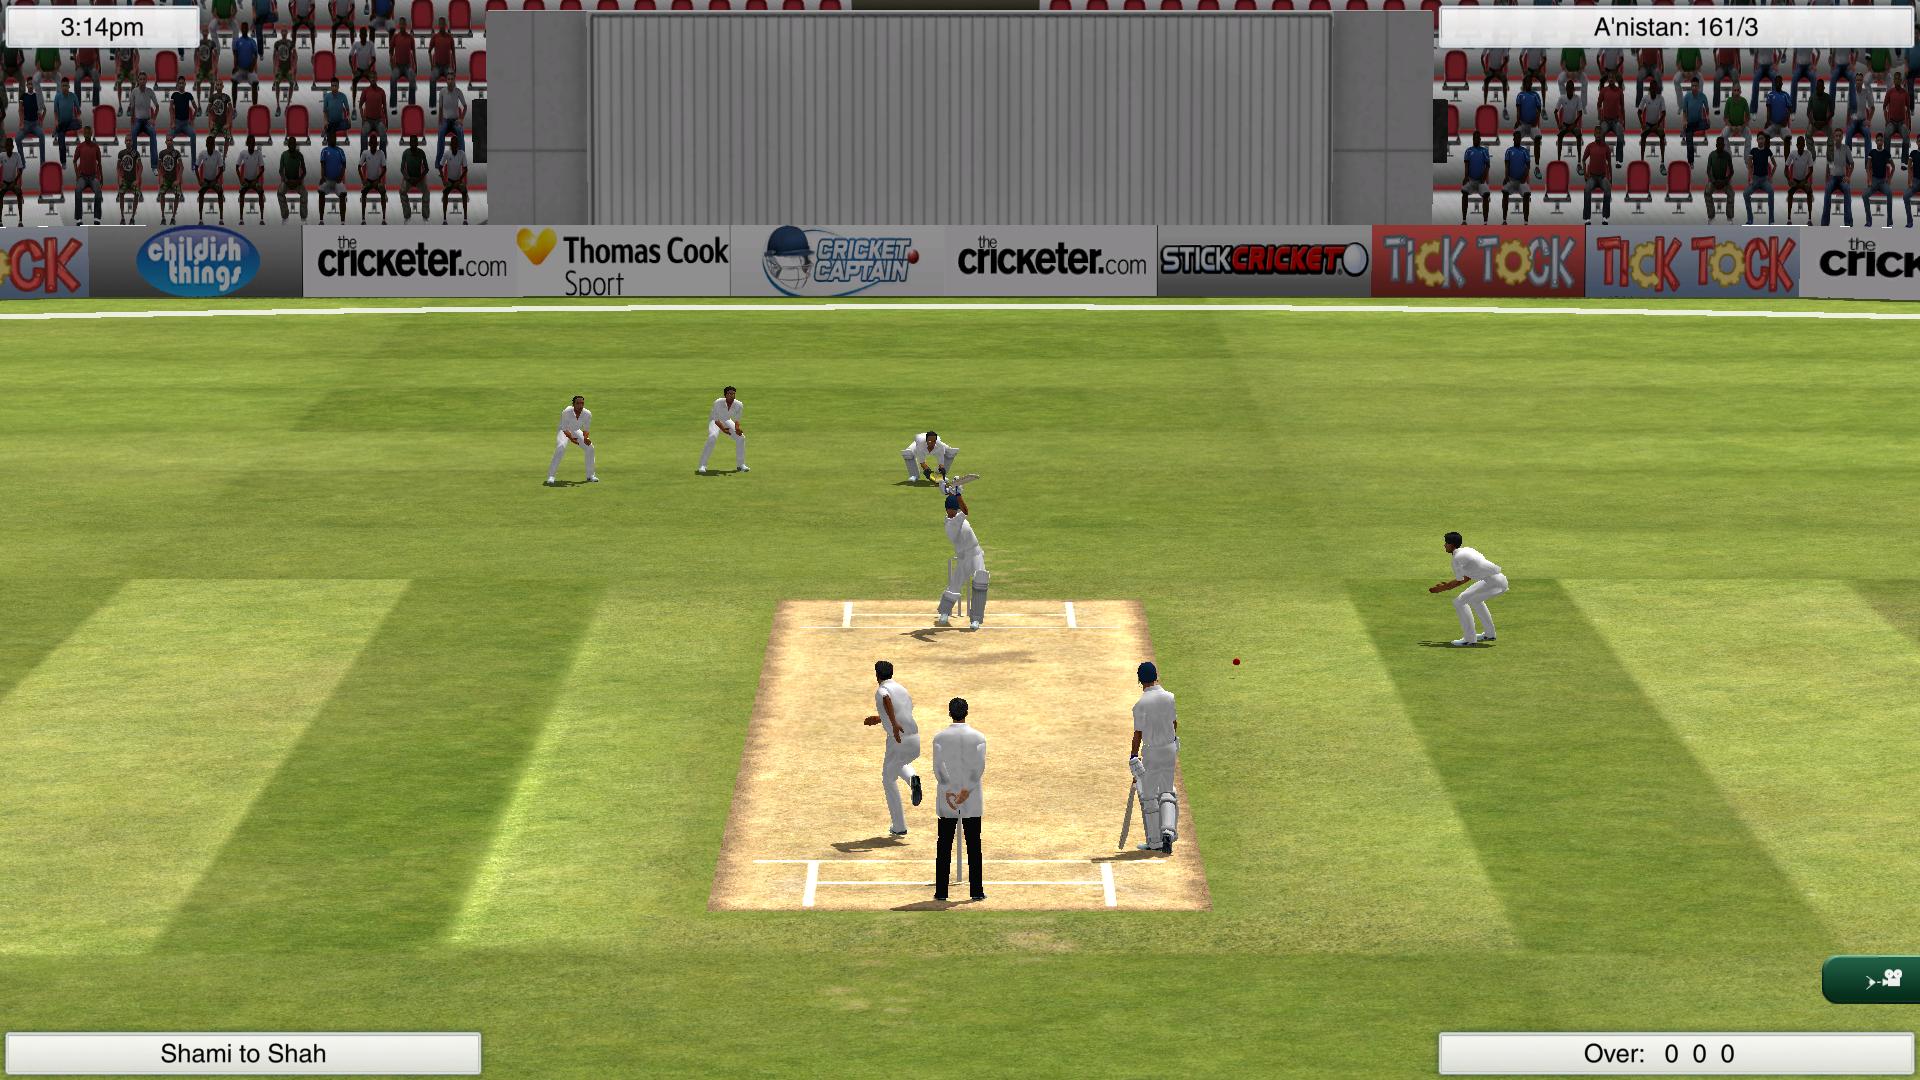 Cricket Captain 2018 Free Download PC windows game